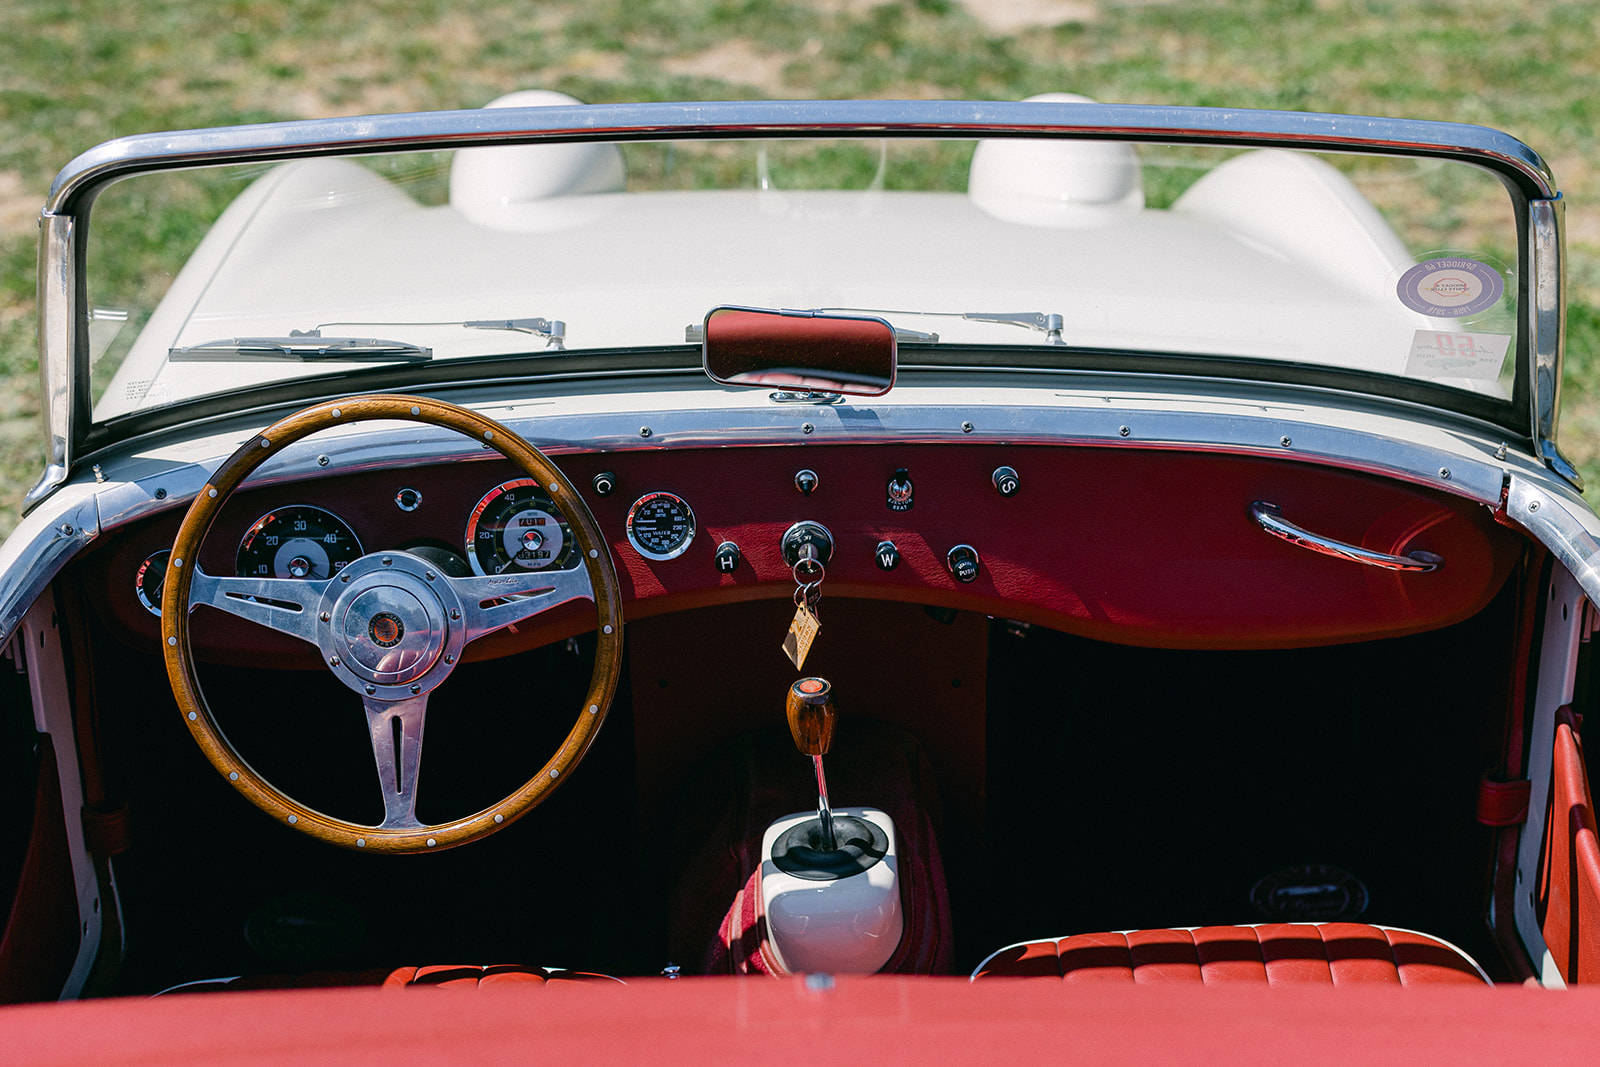 A view of the Provence Classics 1959 Austin Healey Sprite